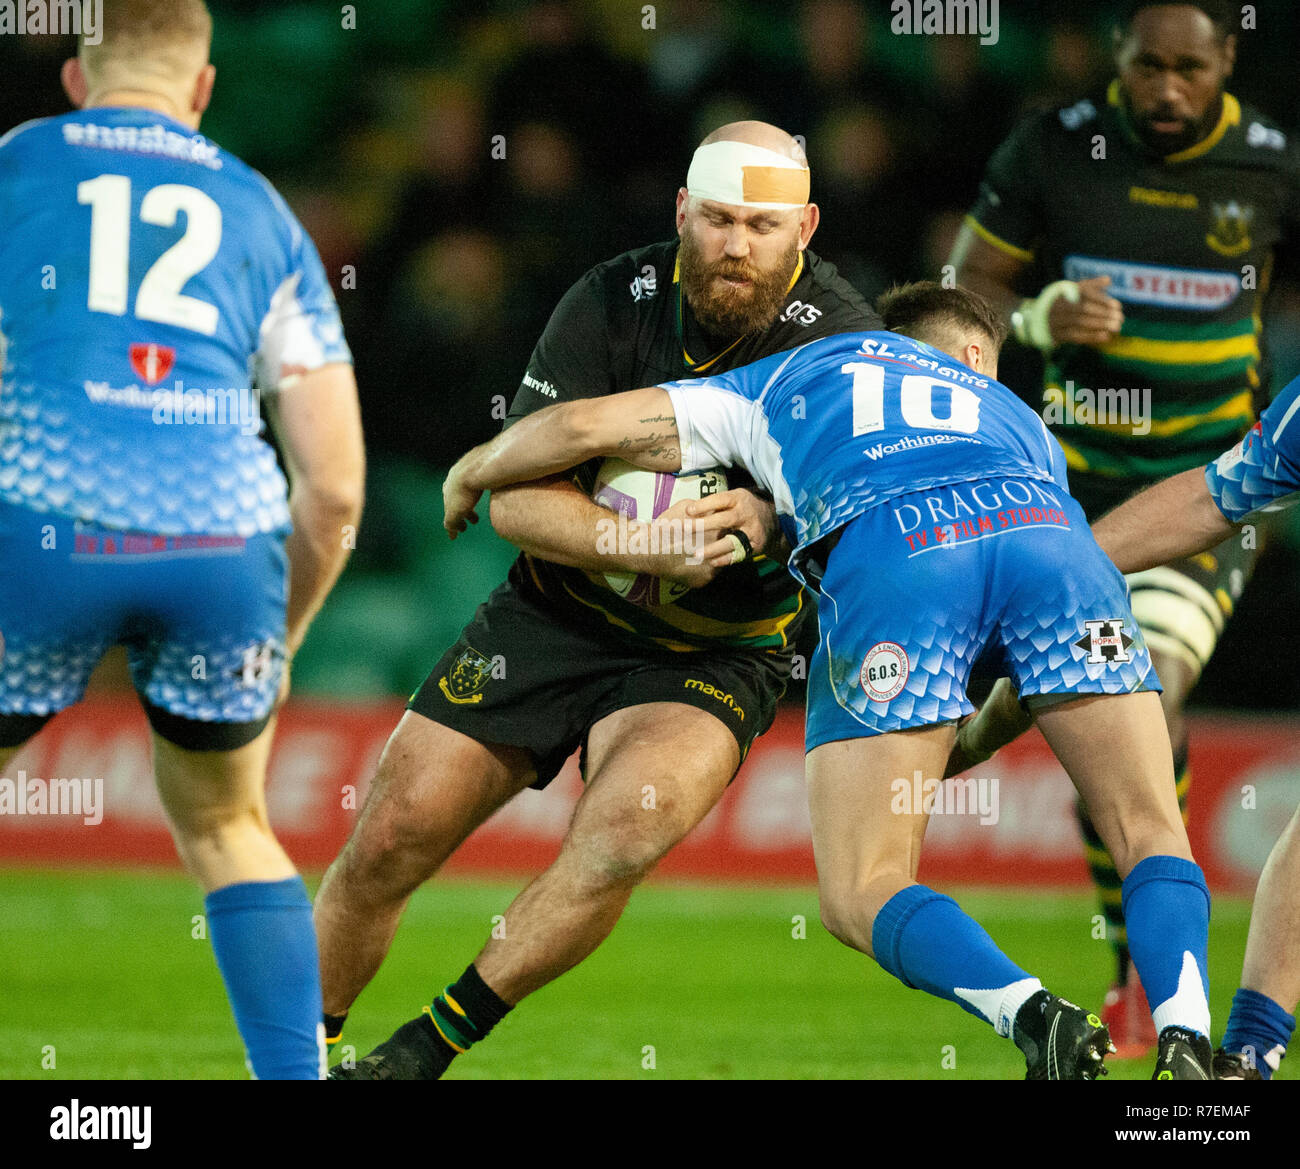 Northampton, UK. 8th December 2018. Ben Franks of Northampton Saints is tackled by Josh Lewis during the European Rugby Challenge Cup match between Northampton Saints and Dragons. Andrew Taylor/Alamy Live News Stock Photo